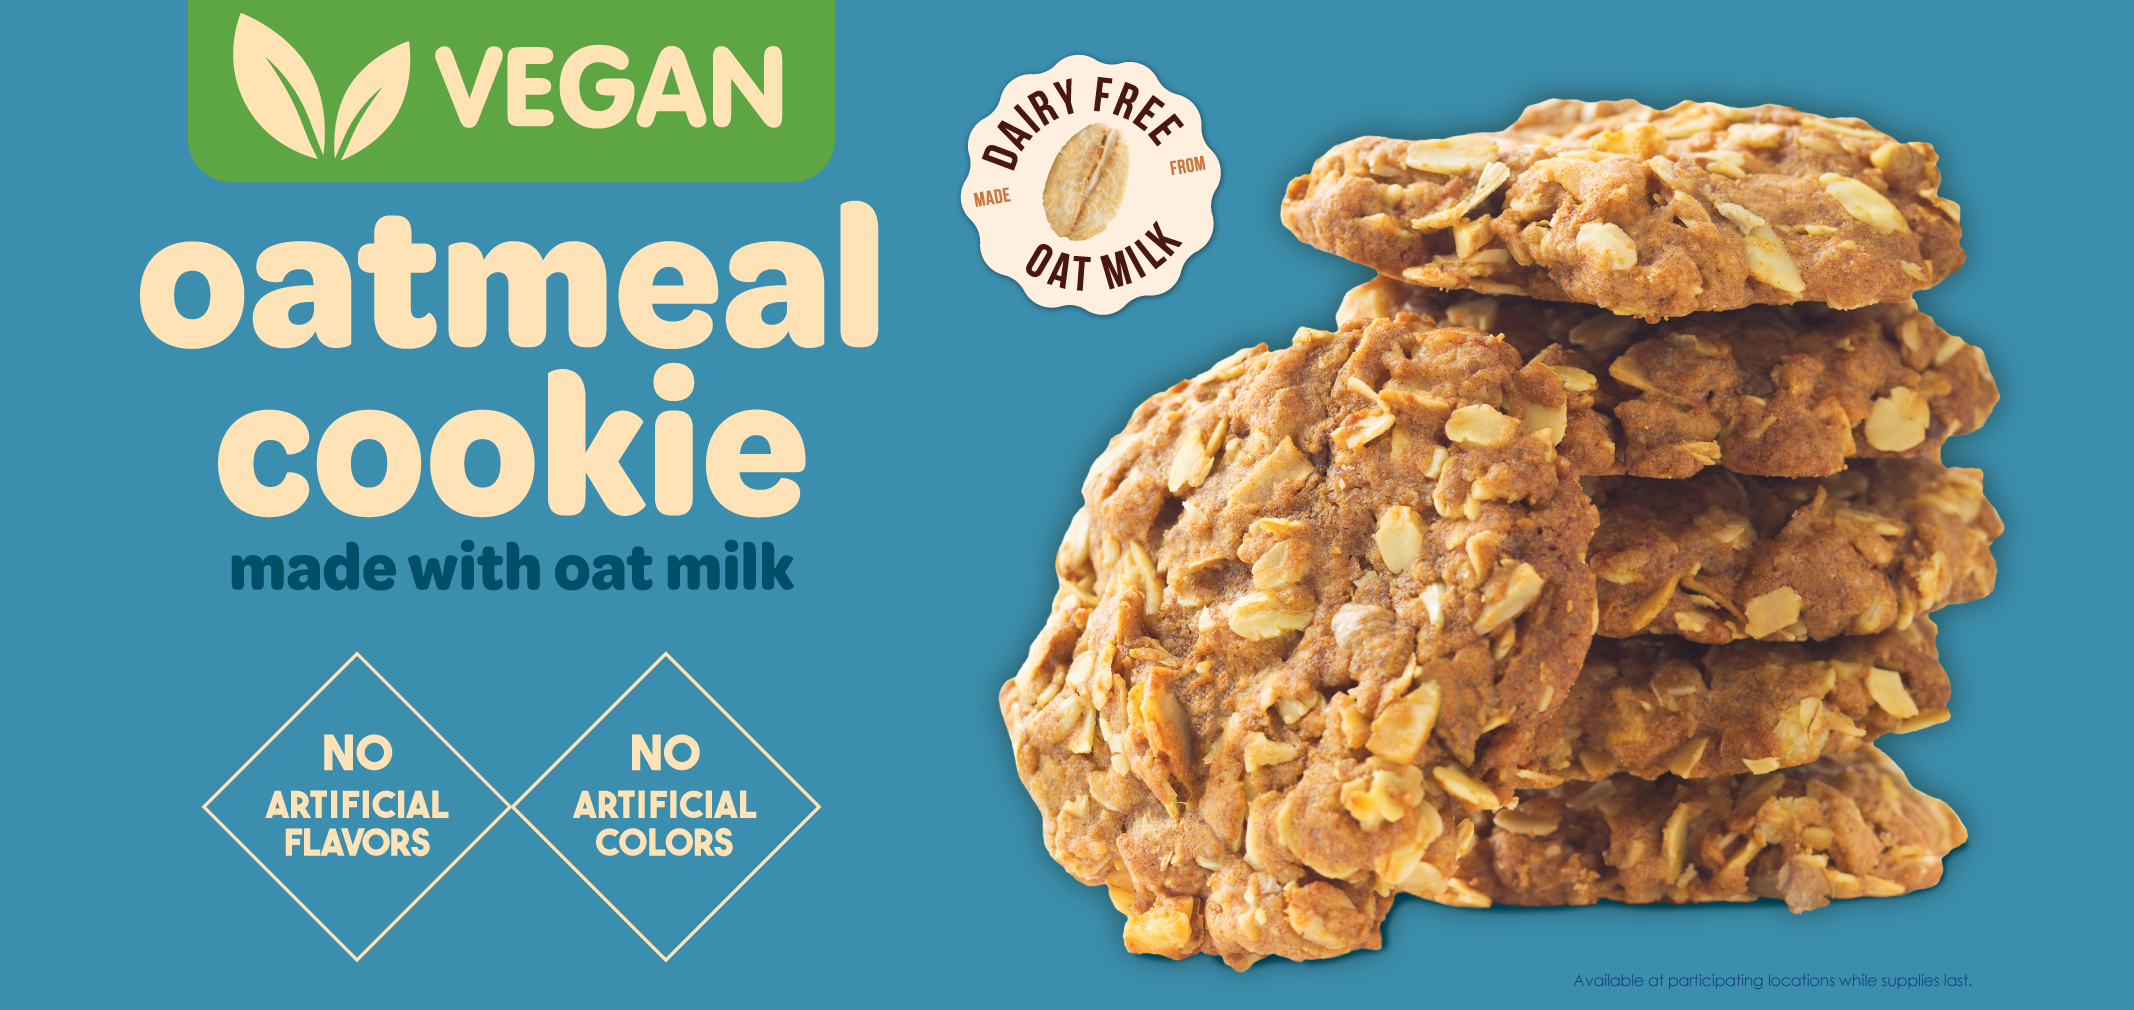 Vegan Oatmeal Cookie made with Oat Milk label image